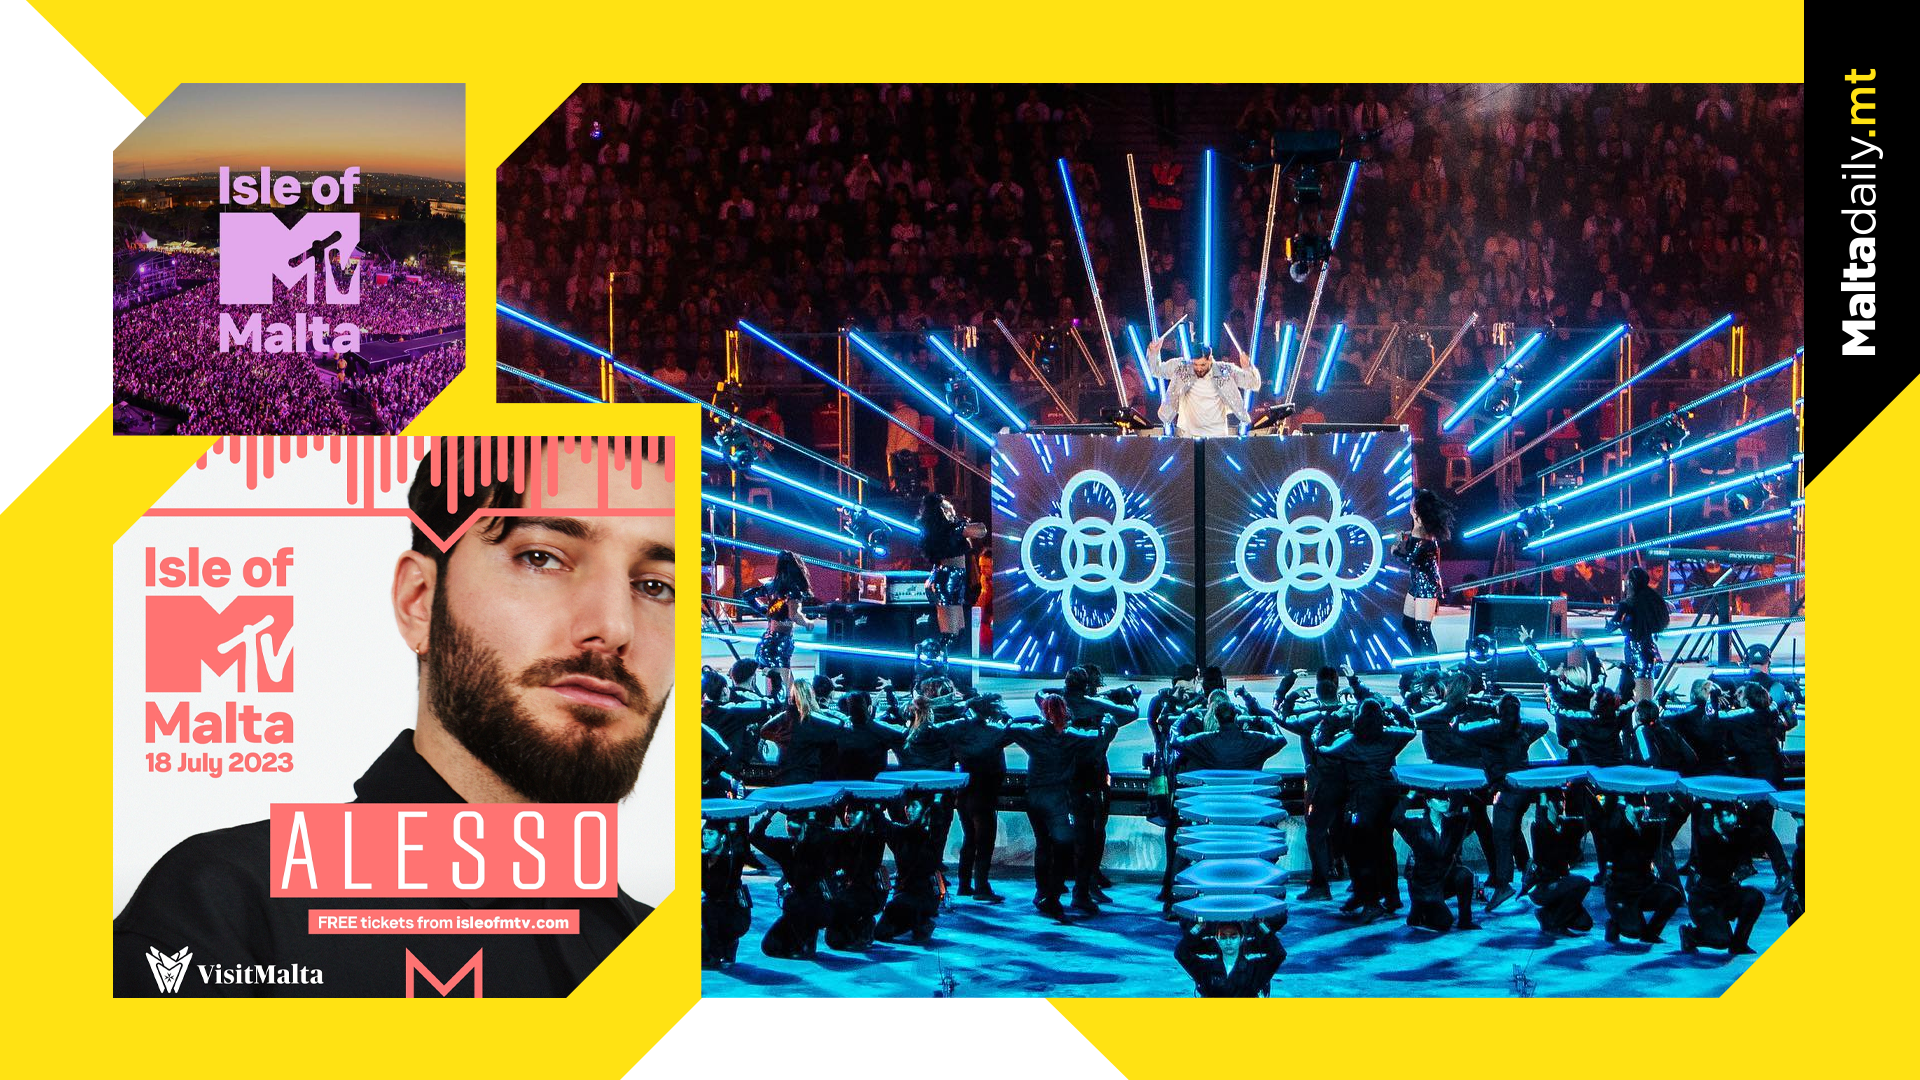 Alesso: From Champions League Final to Isle of MTV Malta